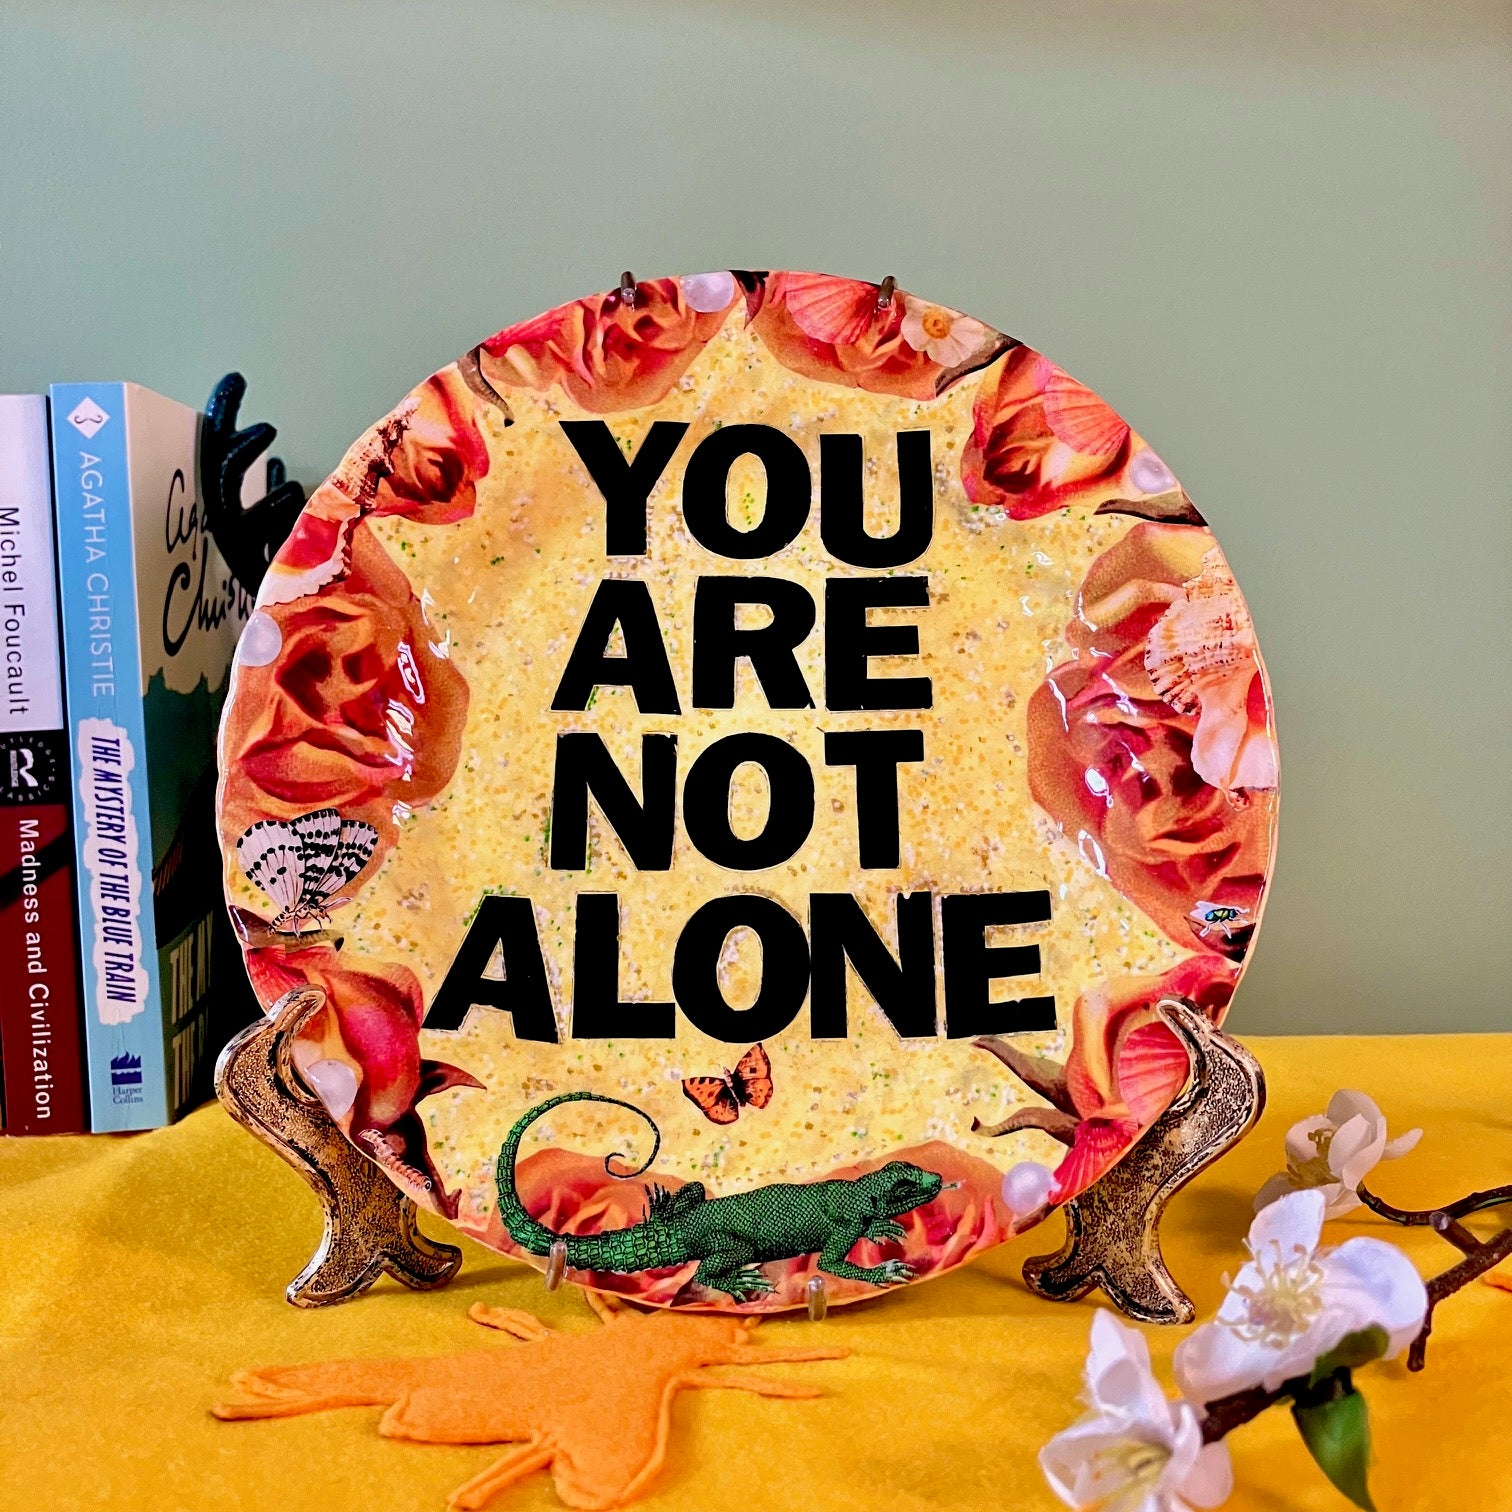 "You Are Not Alone" one-of-a-kind collage artwork Wall Plate by House of Frisson. Featuring the words "You Are Not Alone" framed by roses, pearls, and moths, on a yellow background. Plate on a plate stand resting on a table.